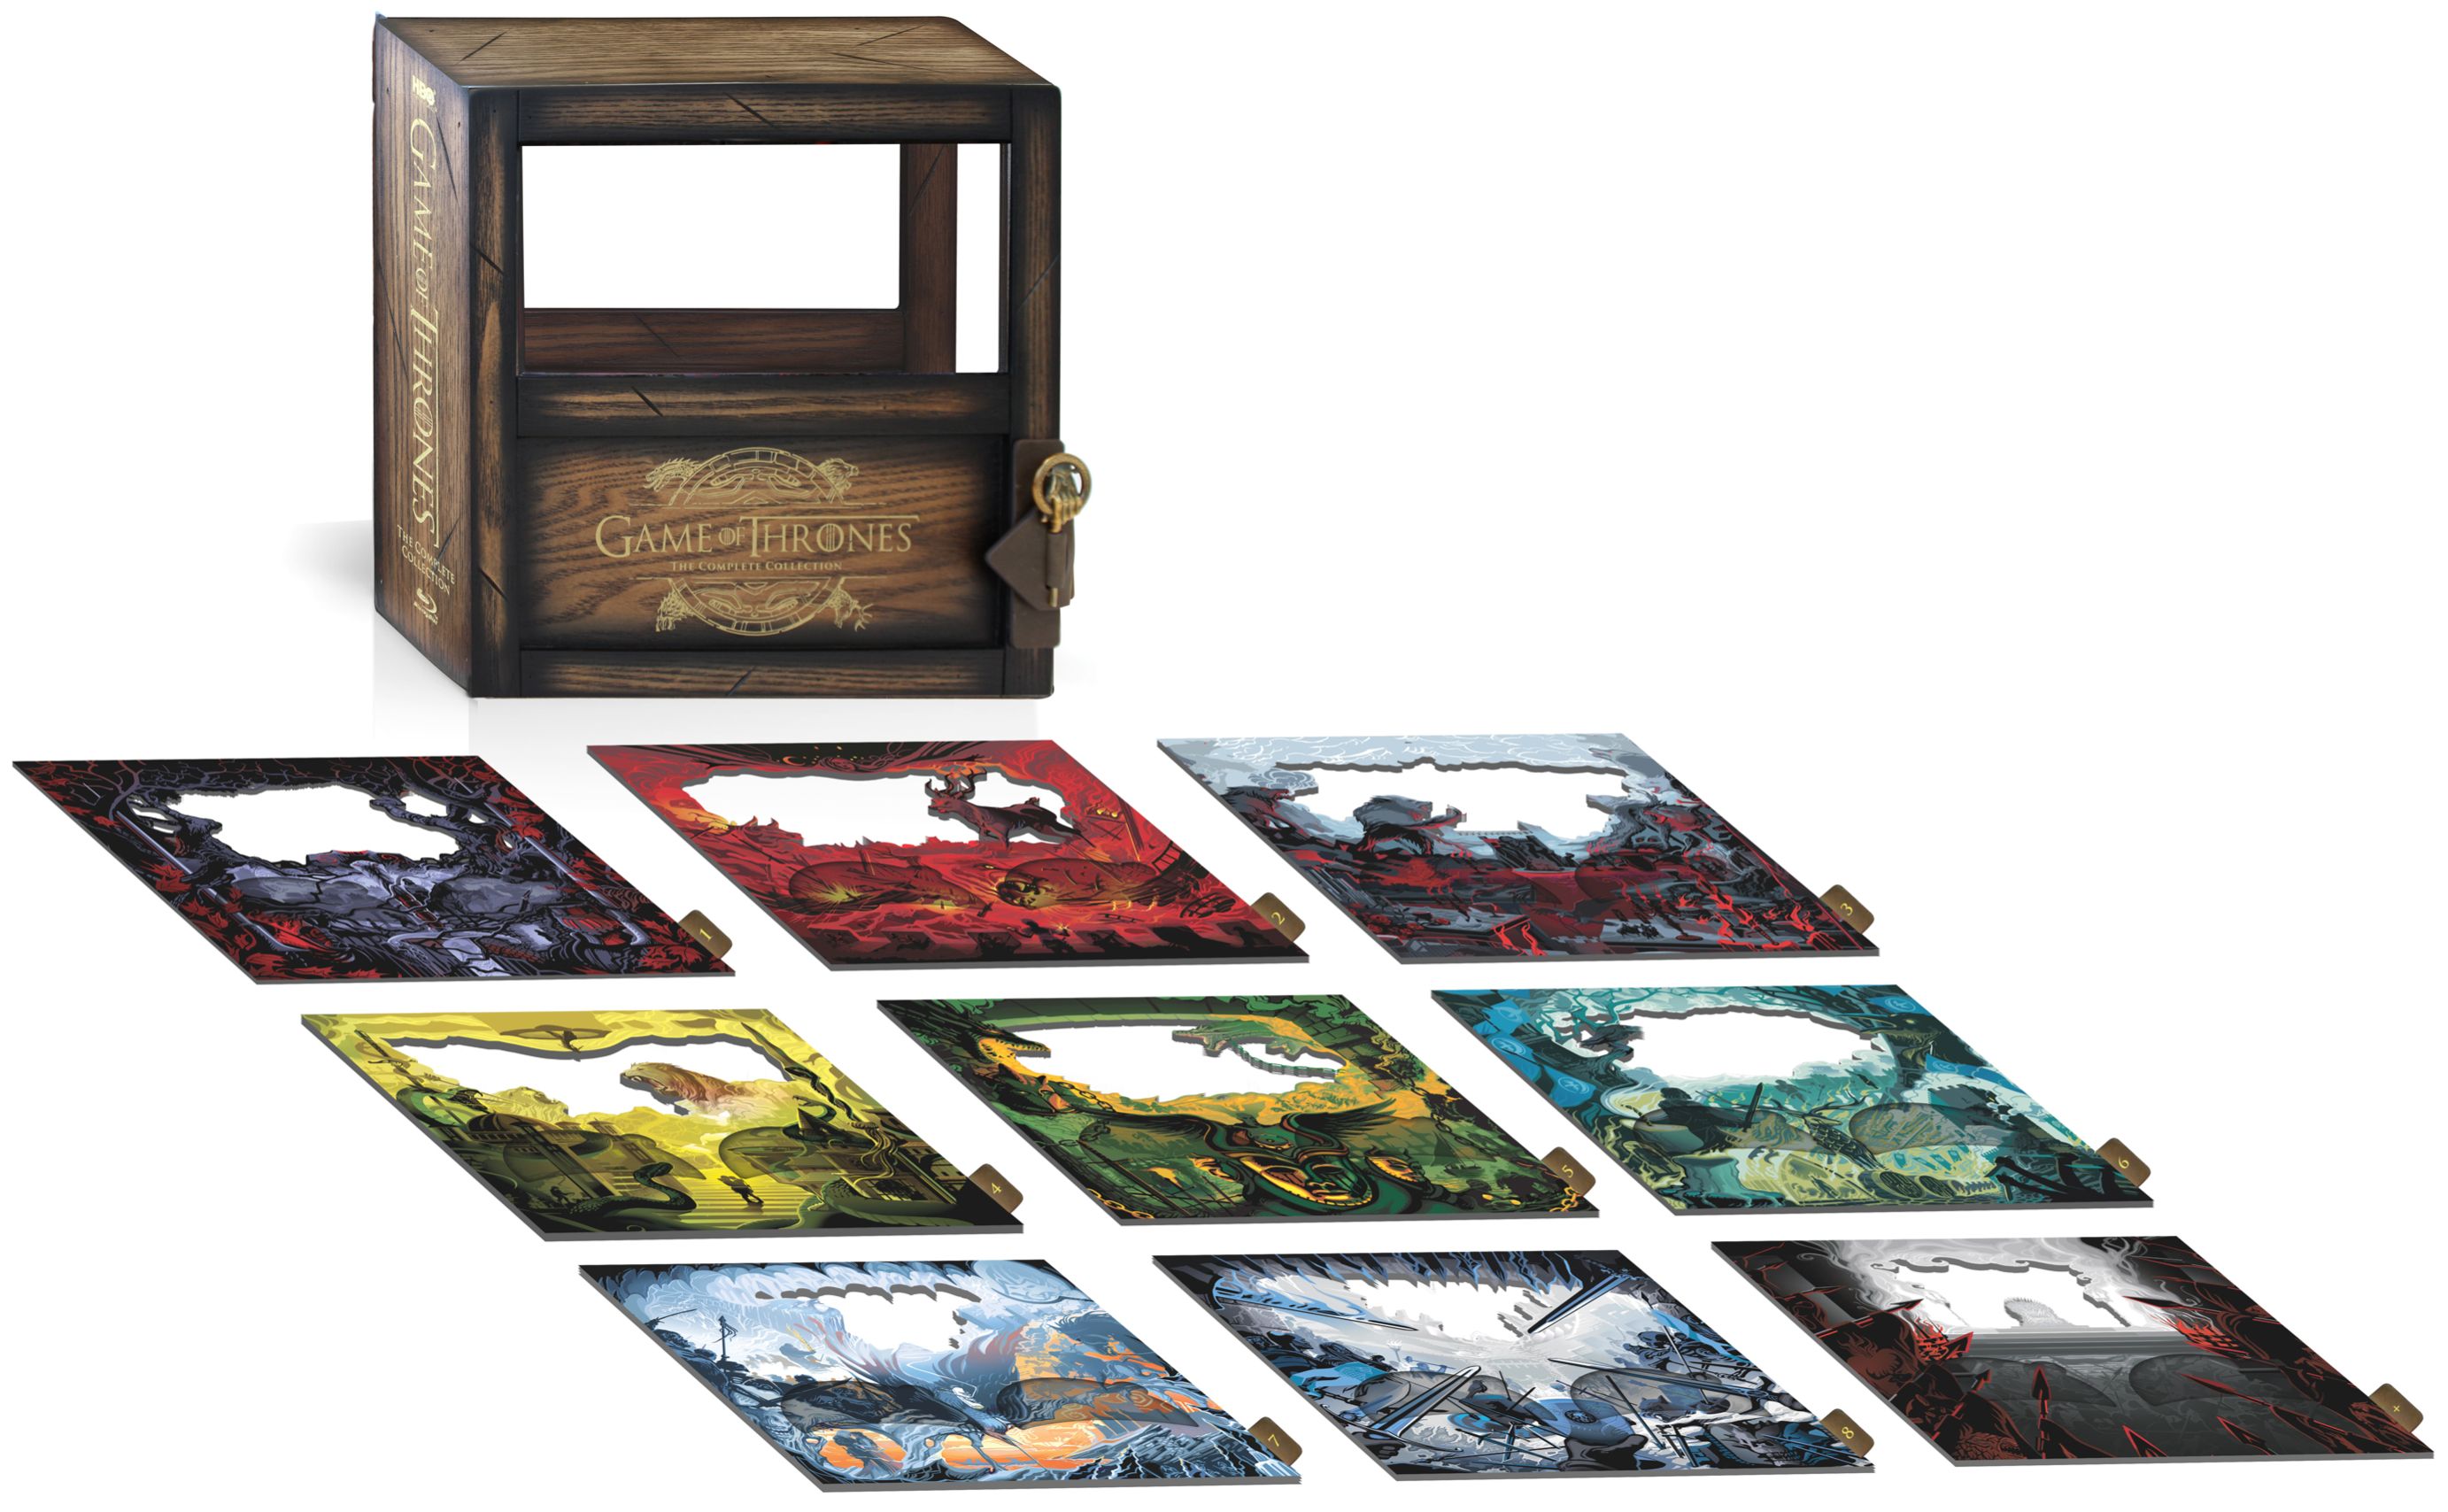 Game of Thrones The Complete Collection Blu-ray Layout